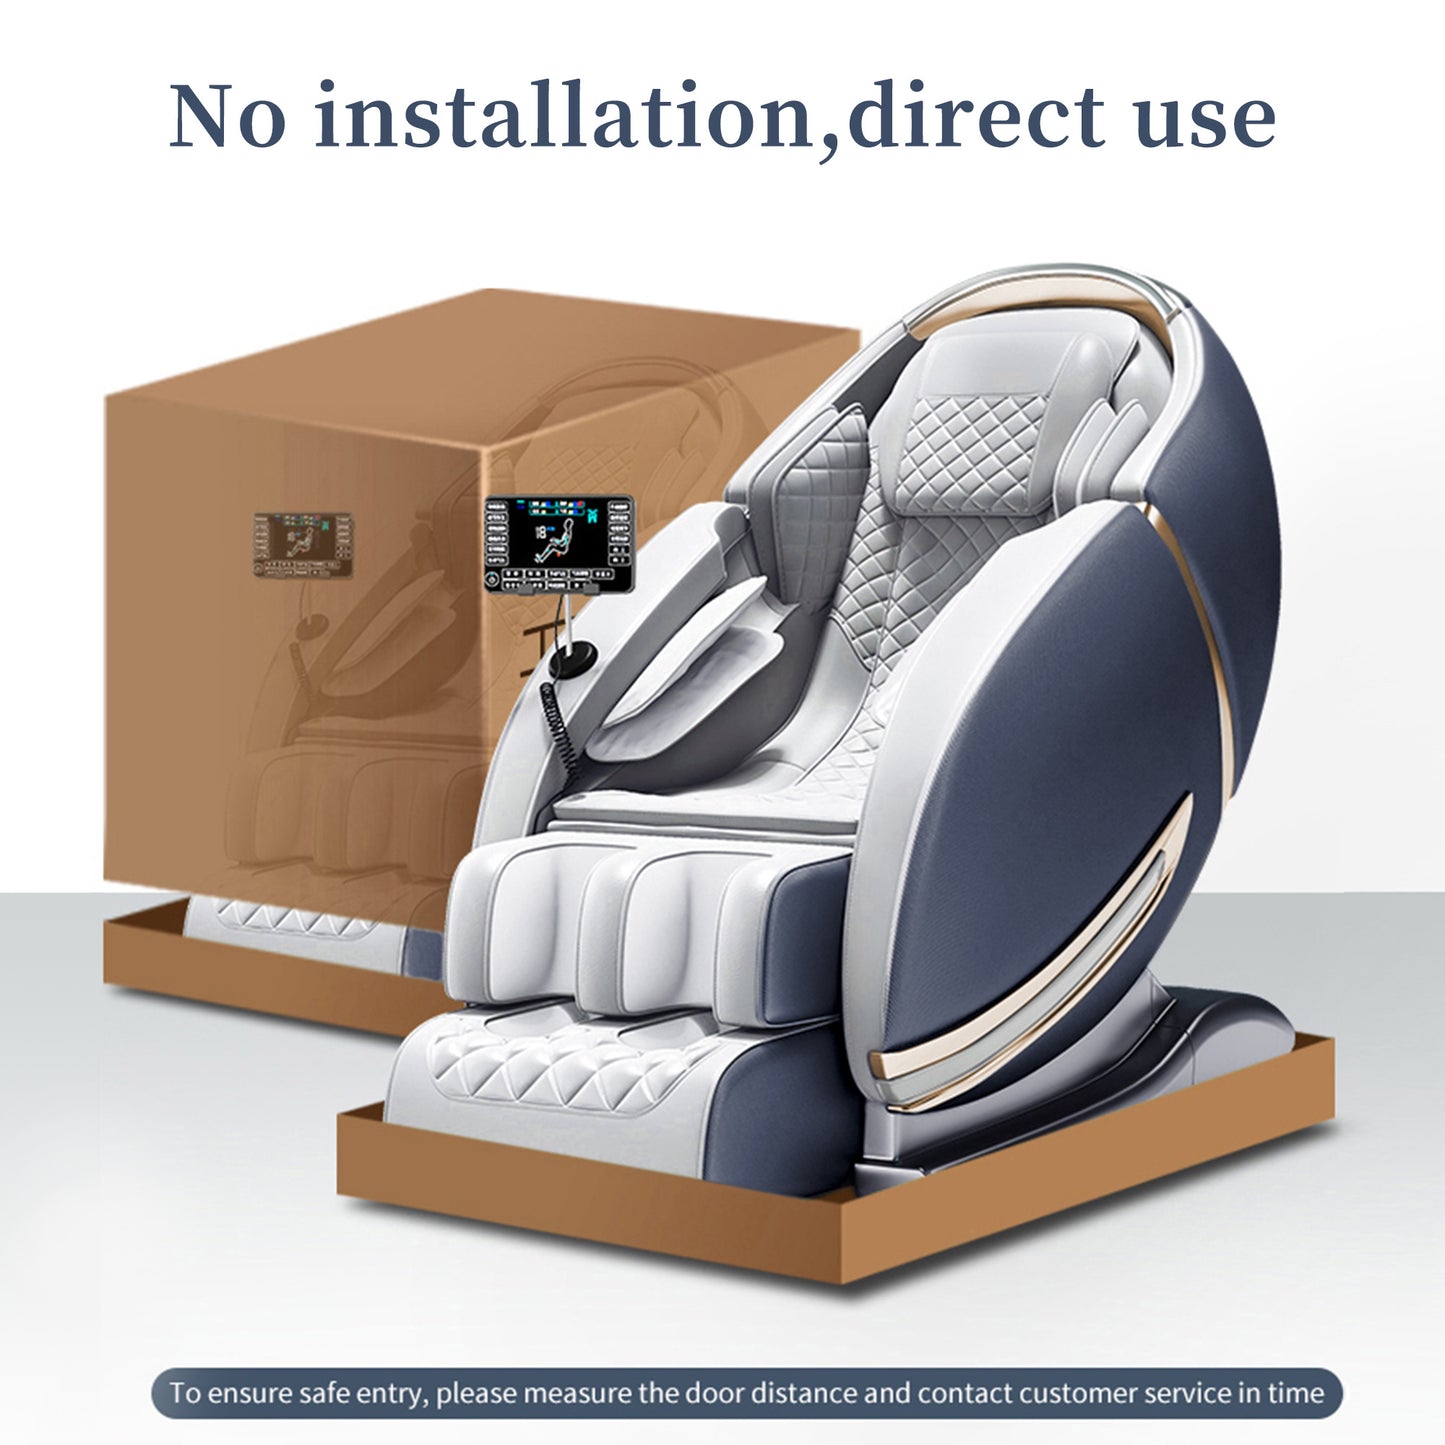 Full Body 3D Luxury Massage Chair with Voice Control and Zero Gravity